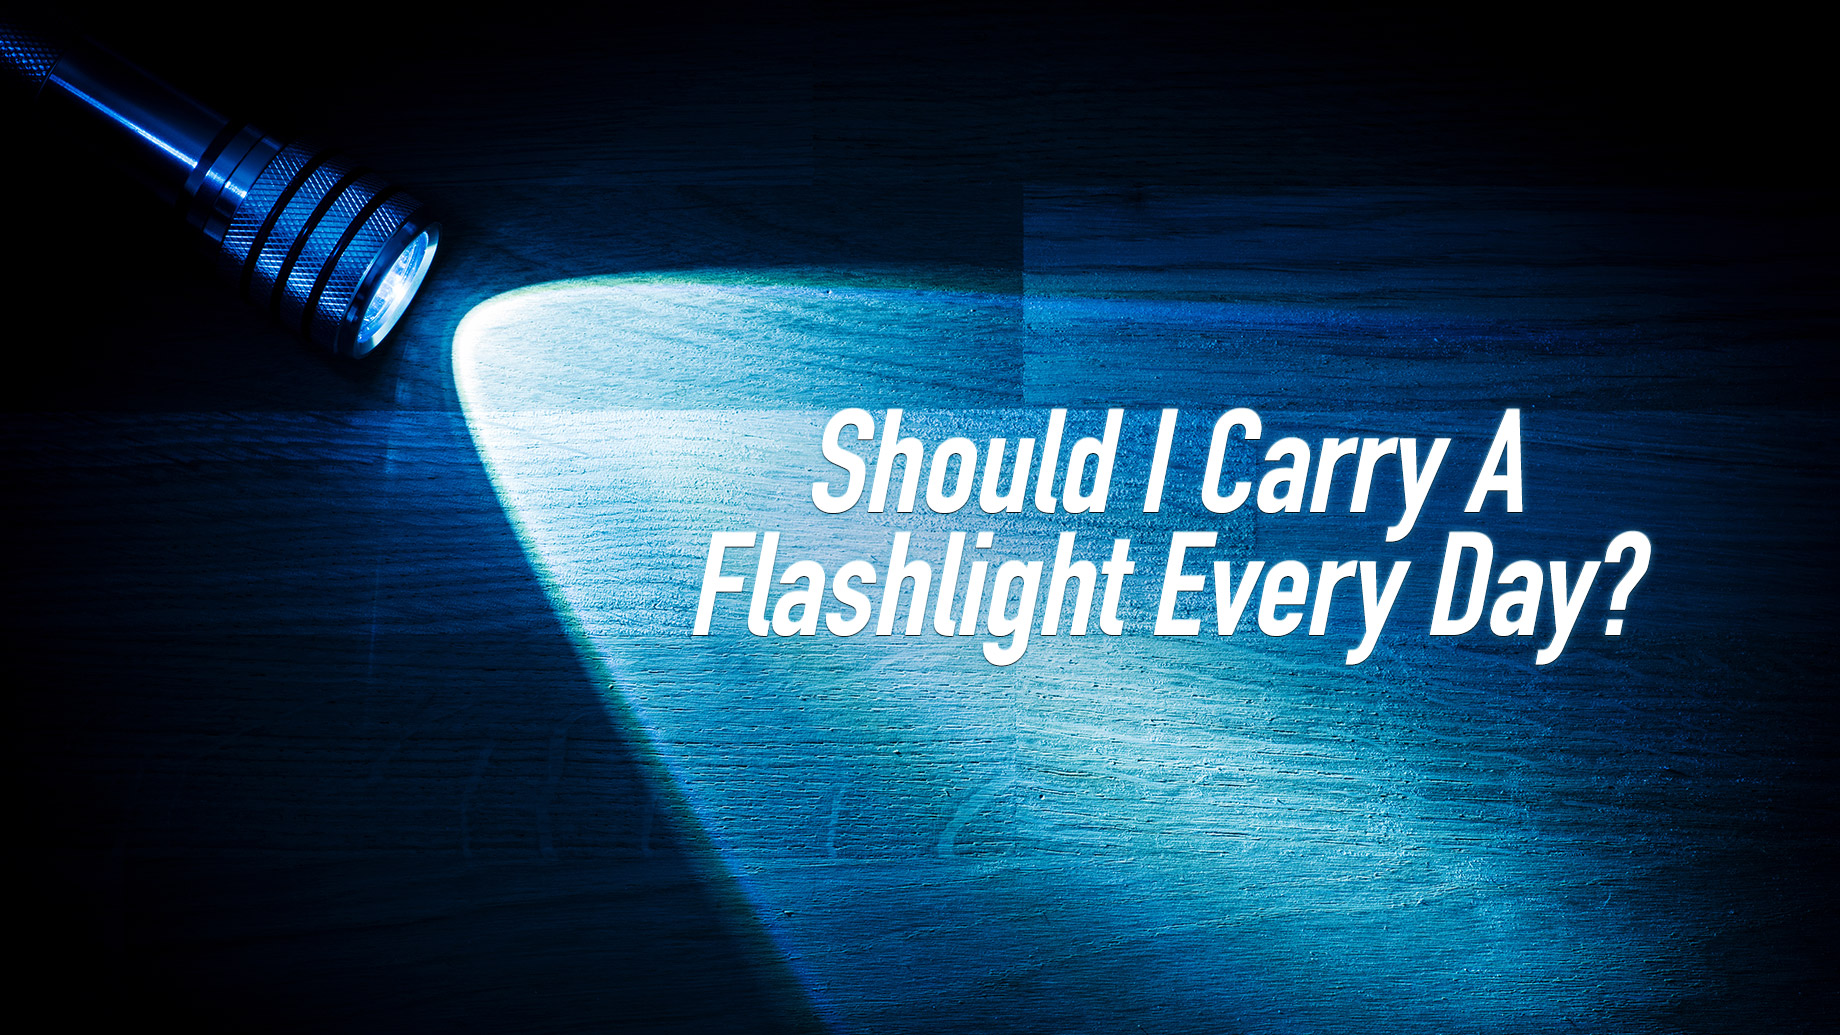 Should I Carry A Flashlight Every Day?